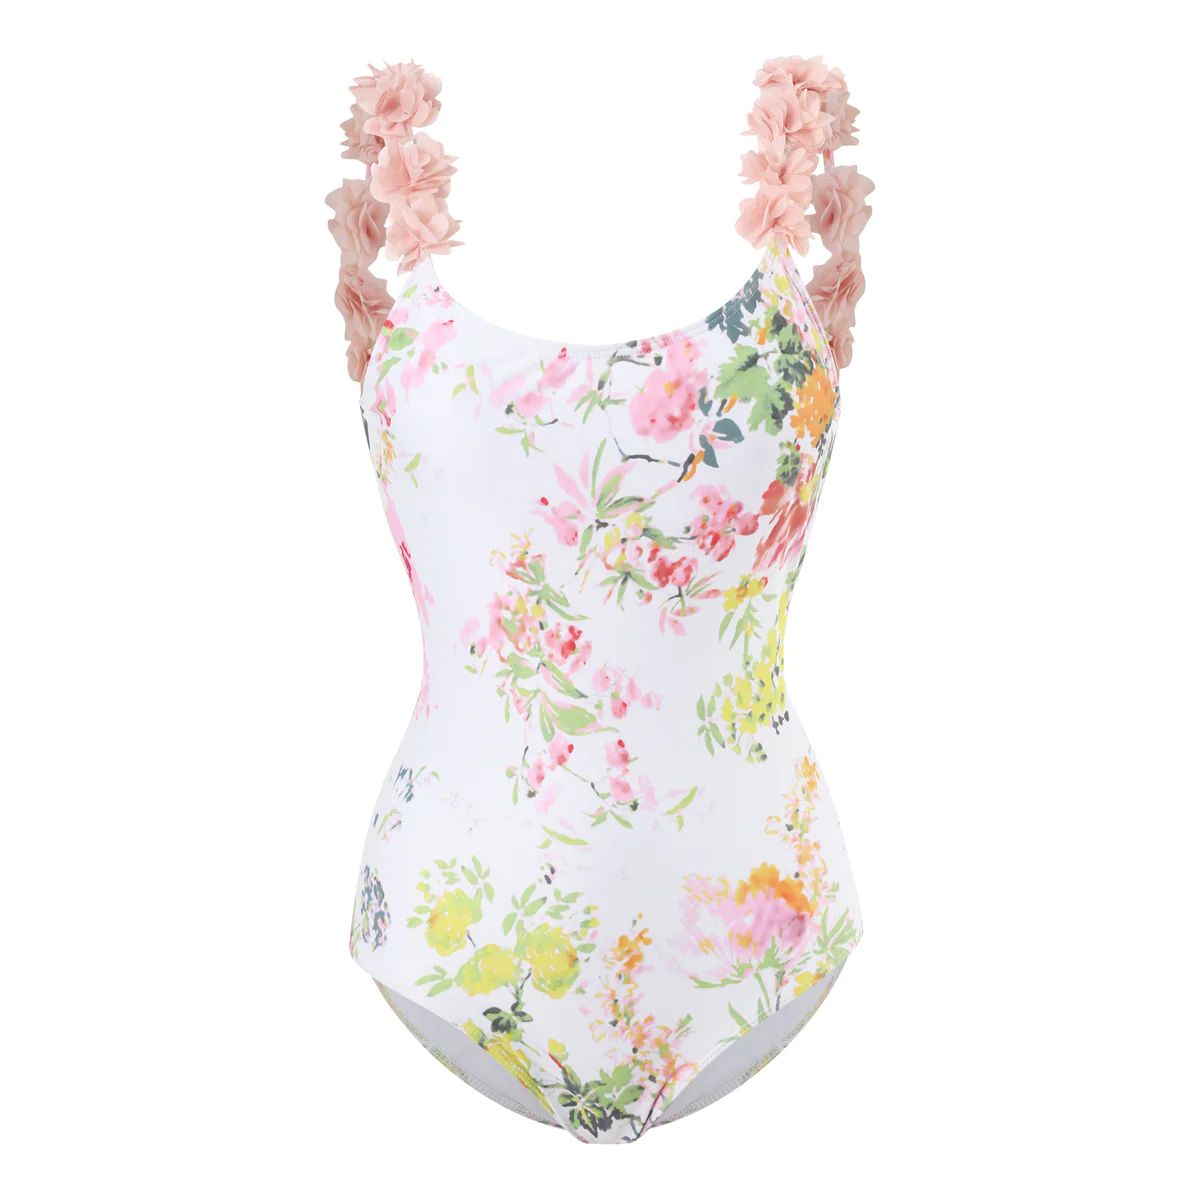 Printed Petals Swimsuit & Beach Cover Up Matching Sets | Goodnight Macaroon